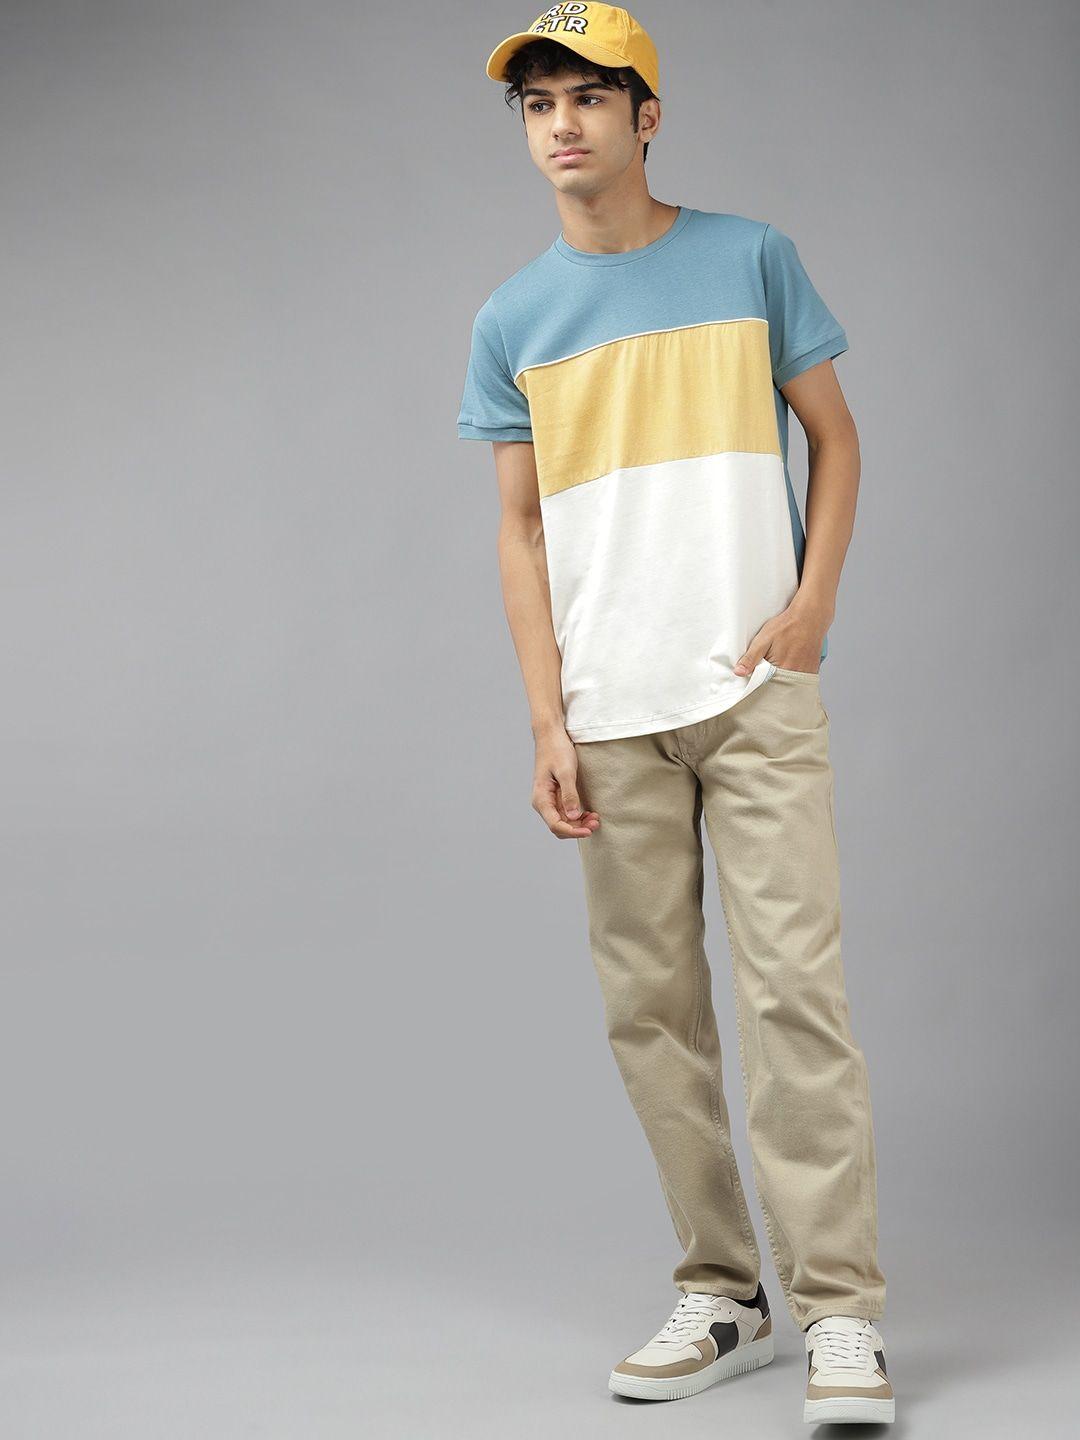 uth by roadster boys blue & yellow colourblocked pure cotton t-shirt